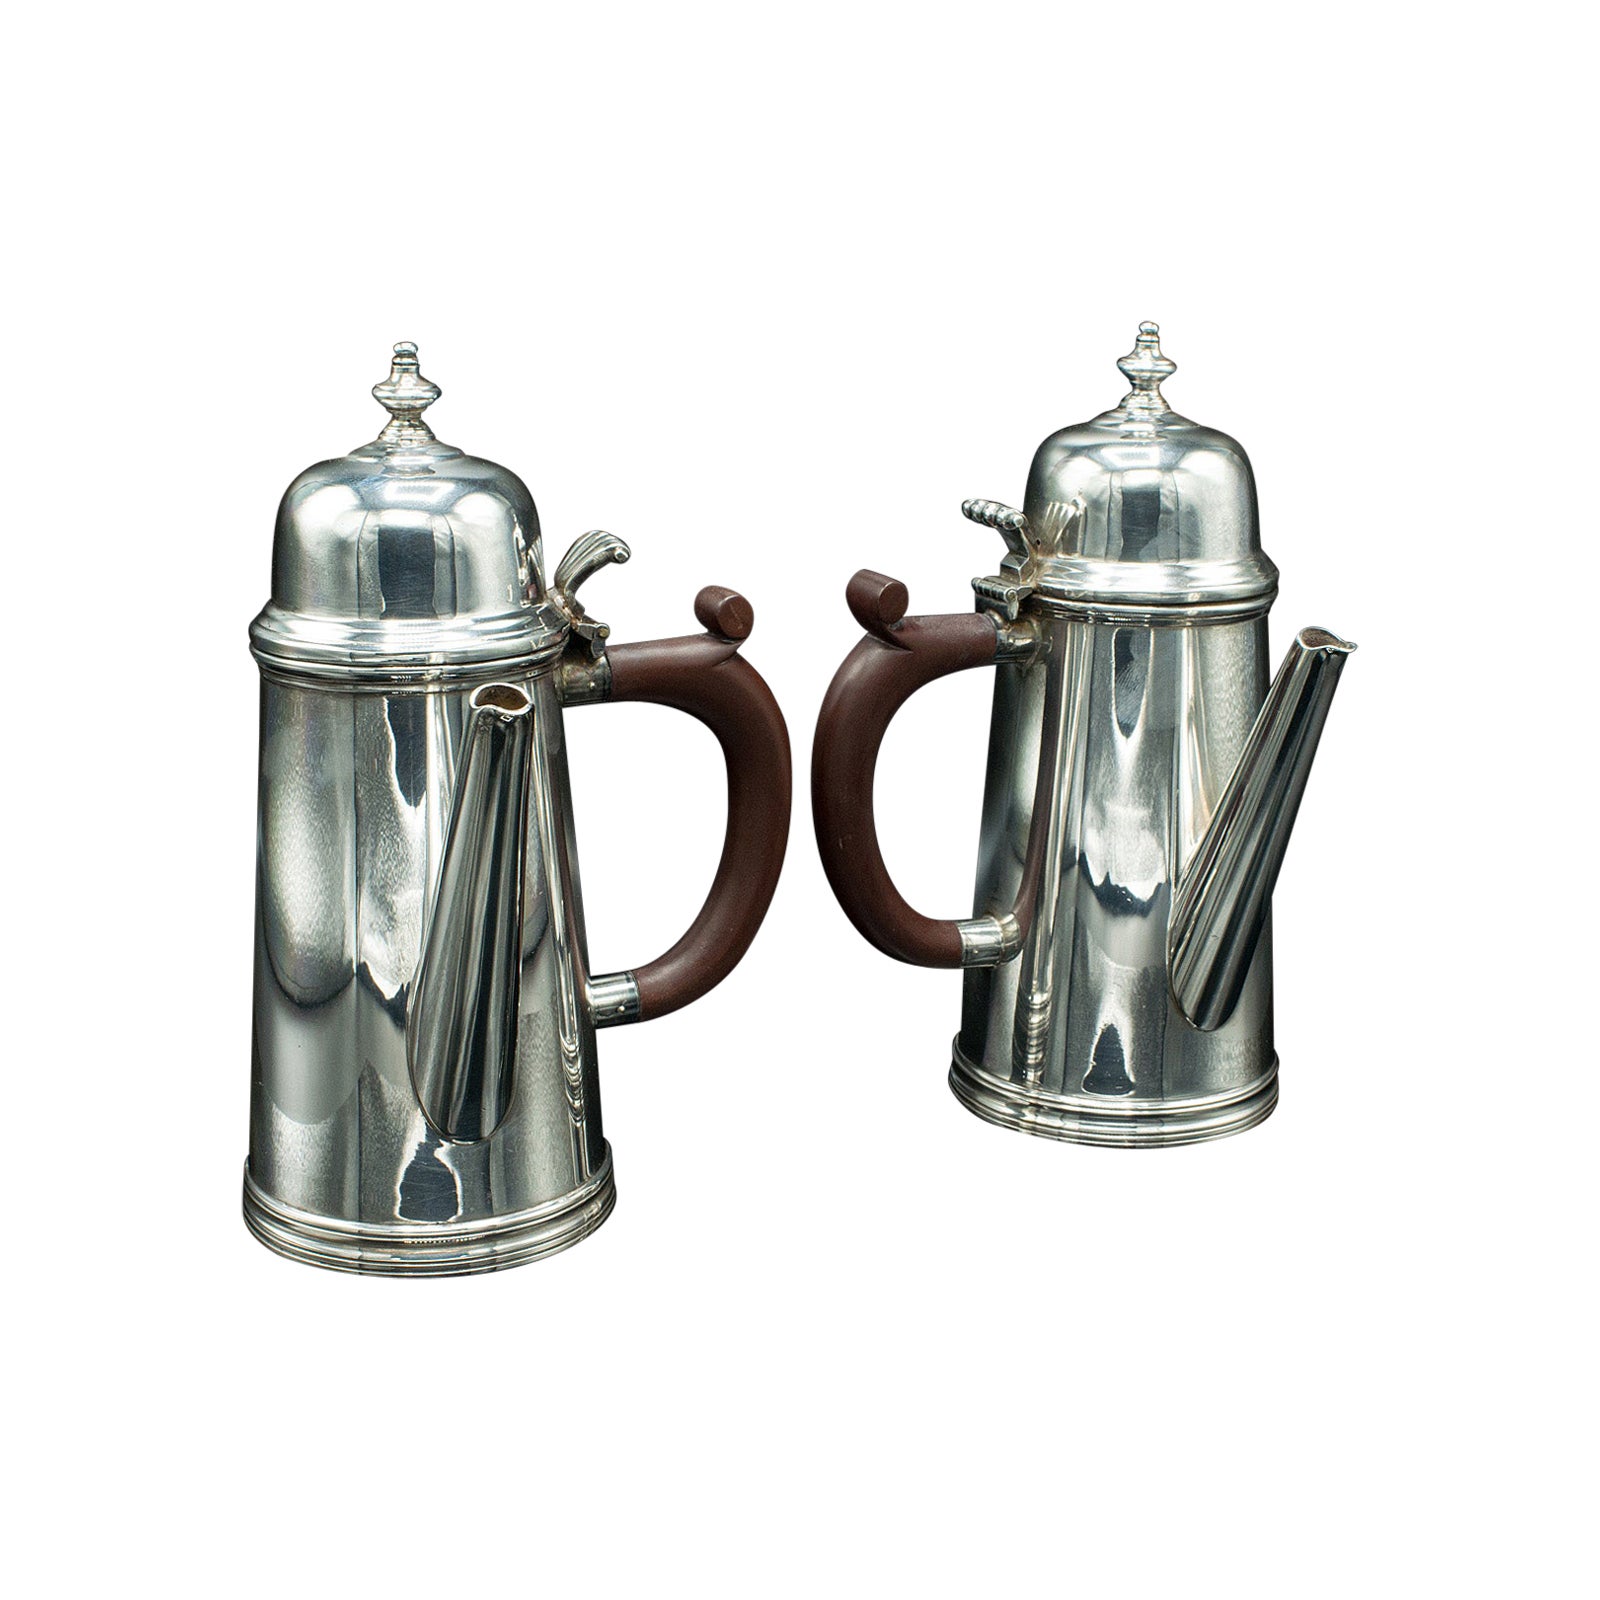 Pair of Vintage Hot Chocolate Jugs, English, Silver Plate, Coffee Serving Pot For Sale